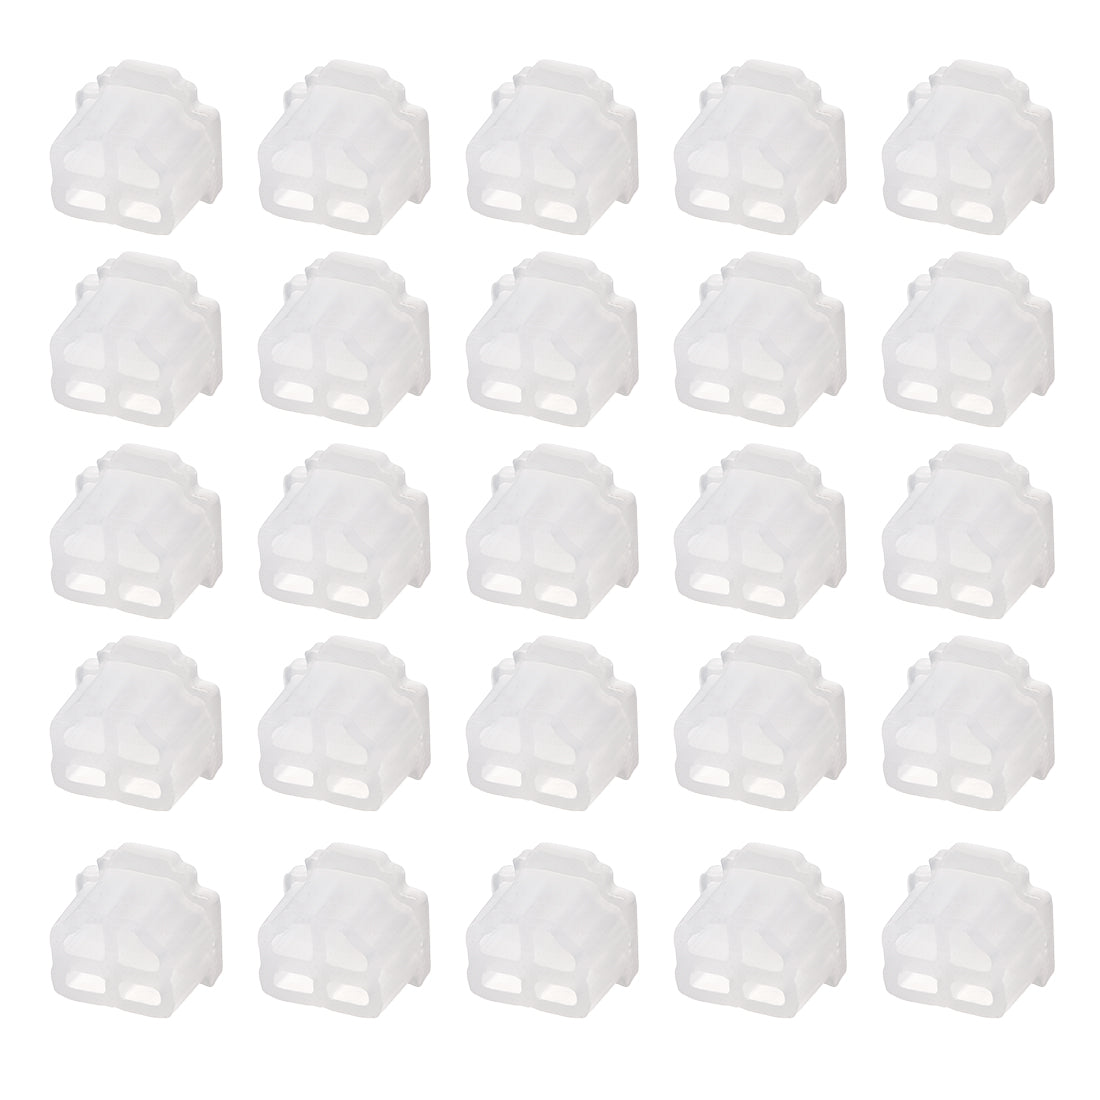 uxcell Uxcell Silicone Telephone Modular Port RJ11 Anti-Dust Stopper Cap Cover Clear 20pcs